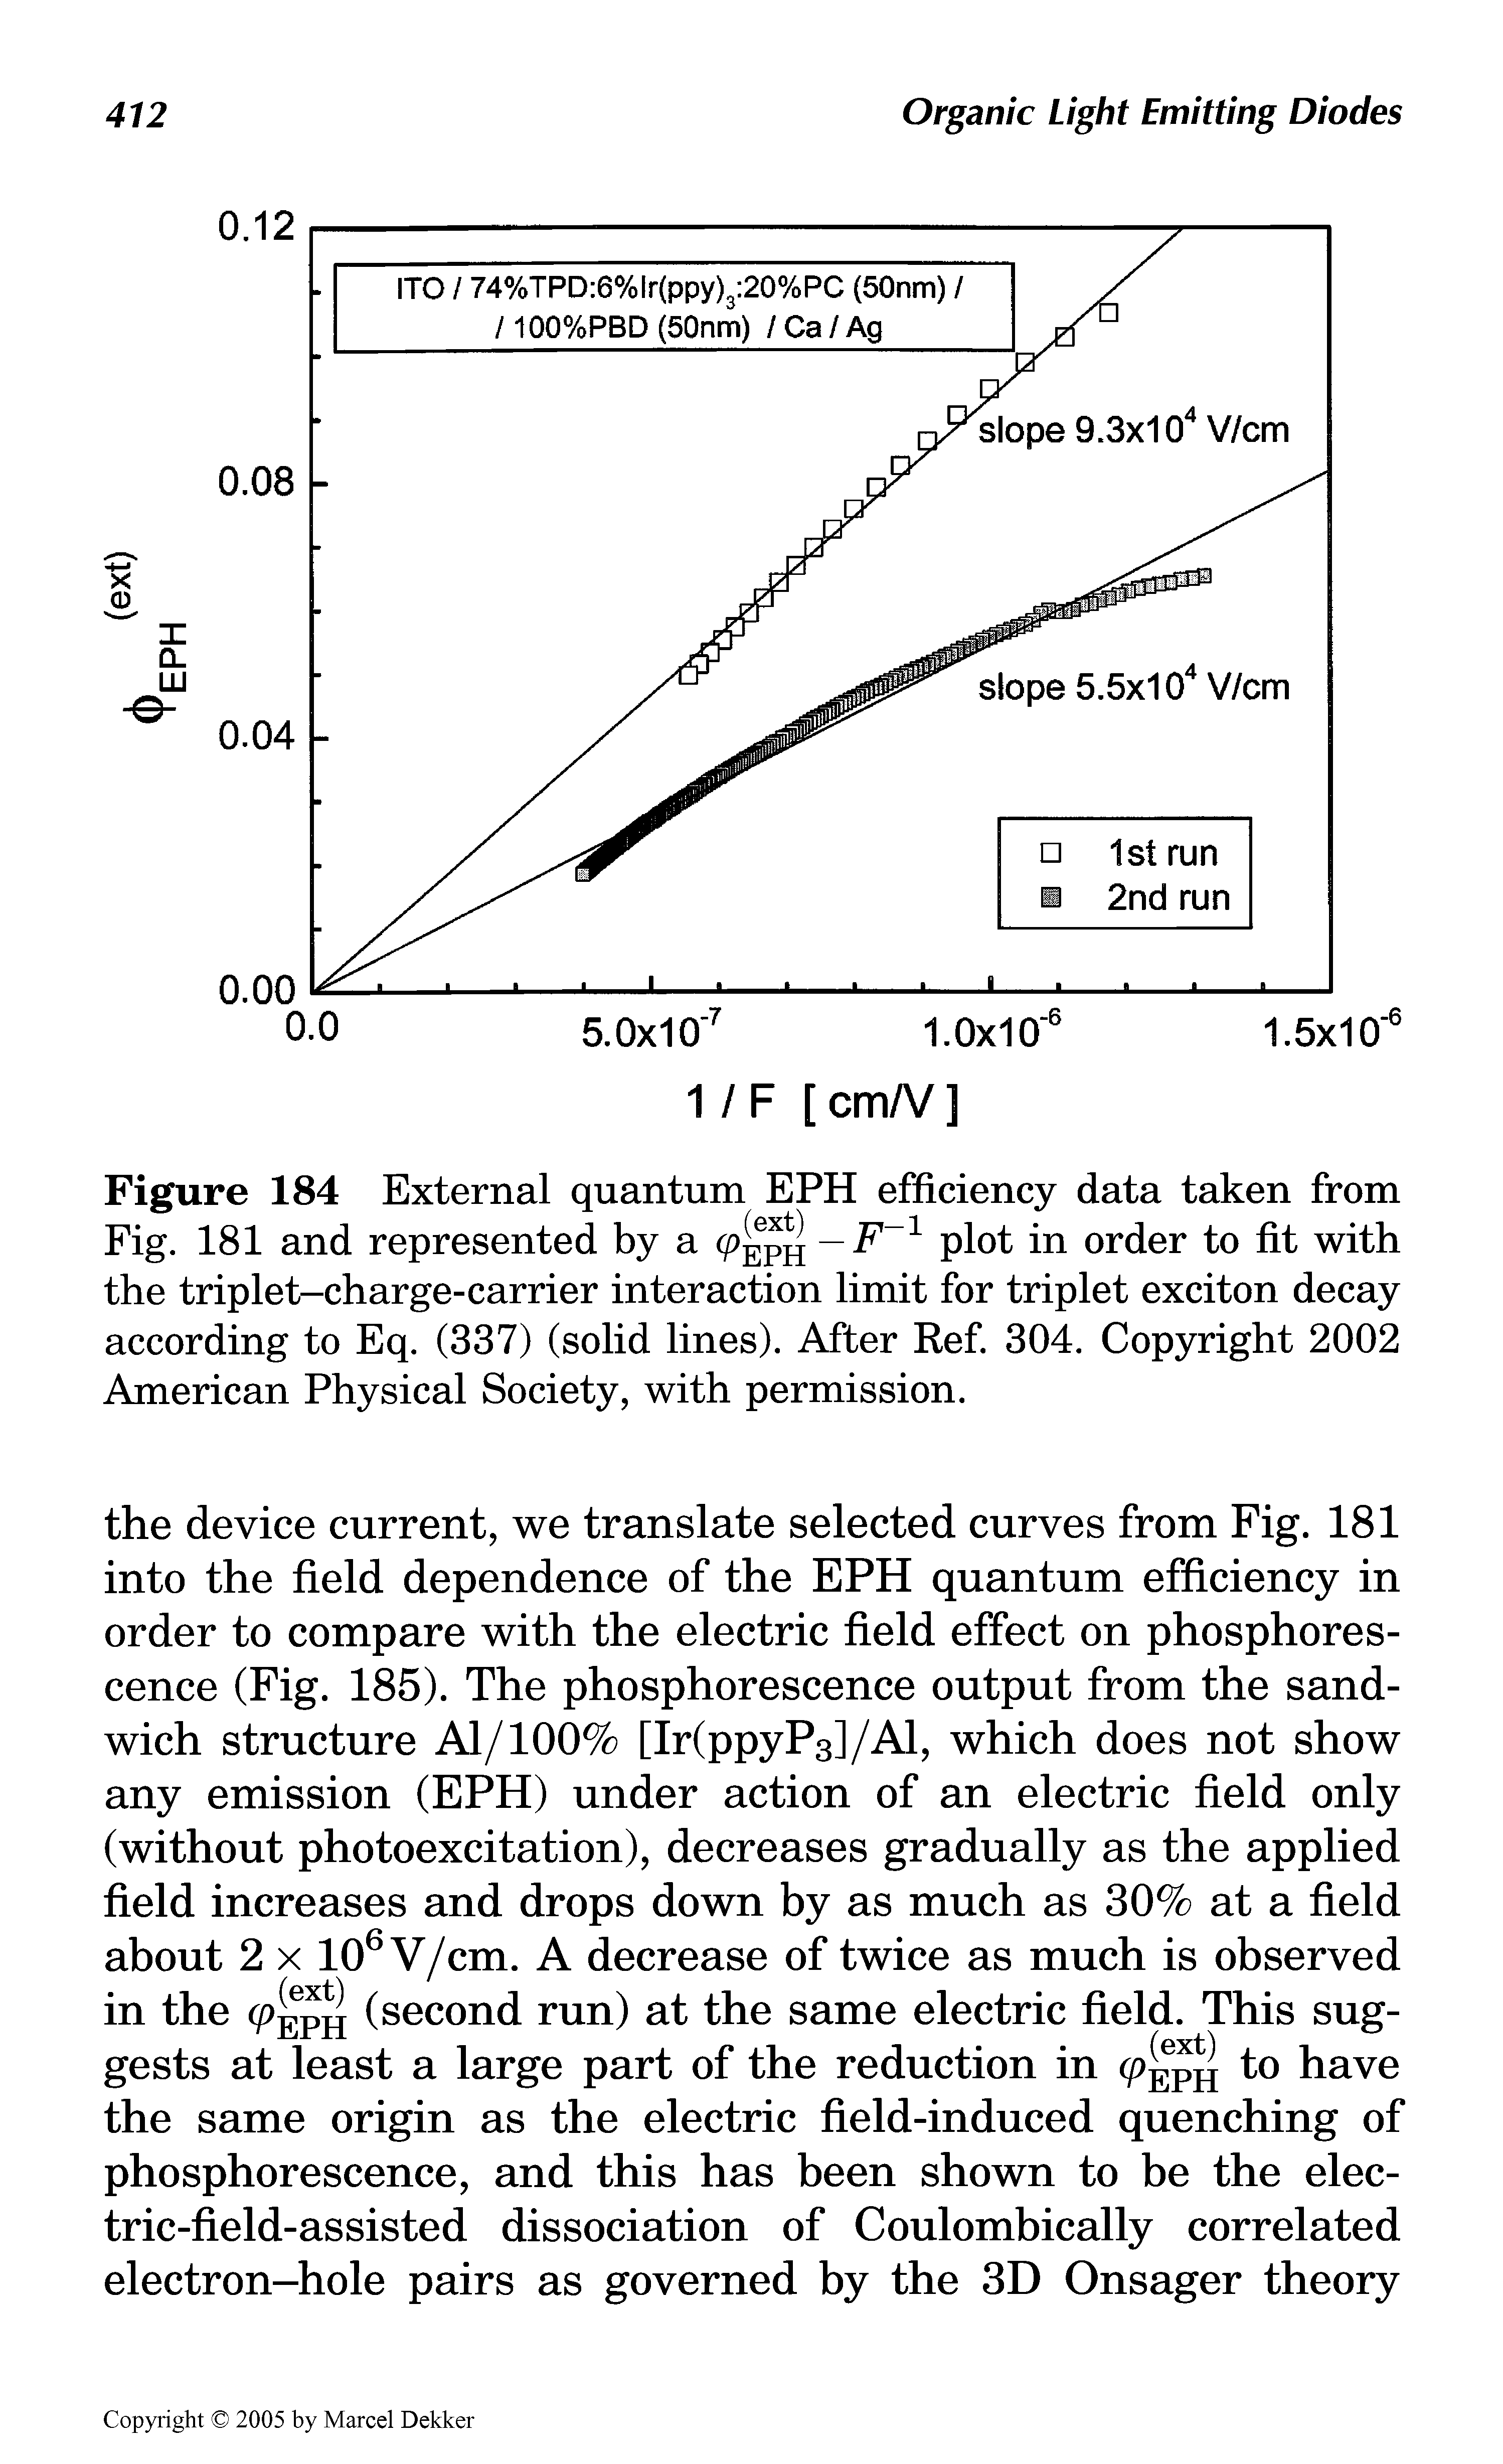 Figure 184 External quantum EPH efficiency data taken from Fig. 181 and represented by a < eph pl°t n order to fit with the trip 1 e t—charge-ca i rier interaction limit for triplet exciton decay according to Eq. (337) (solid lines). After Ref. 304. Copyright 2002 American Physical Society, with permission.